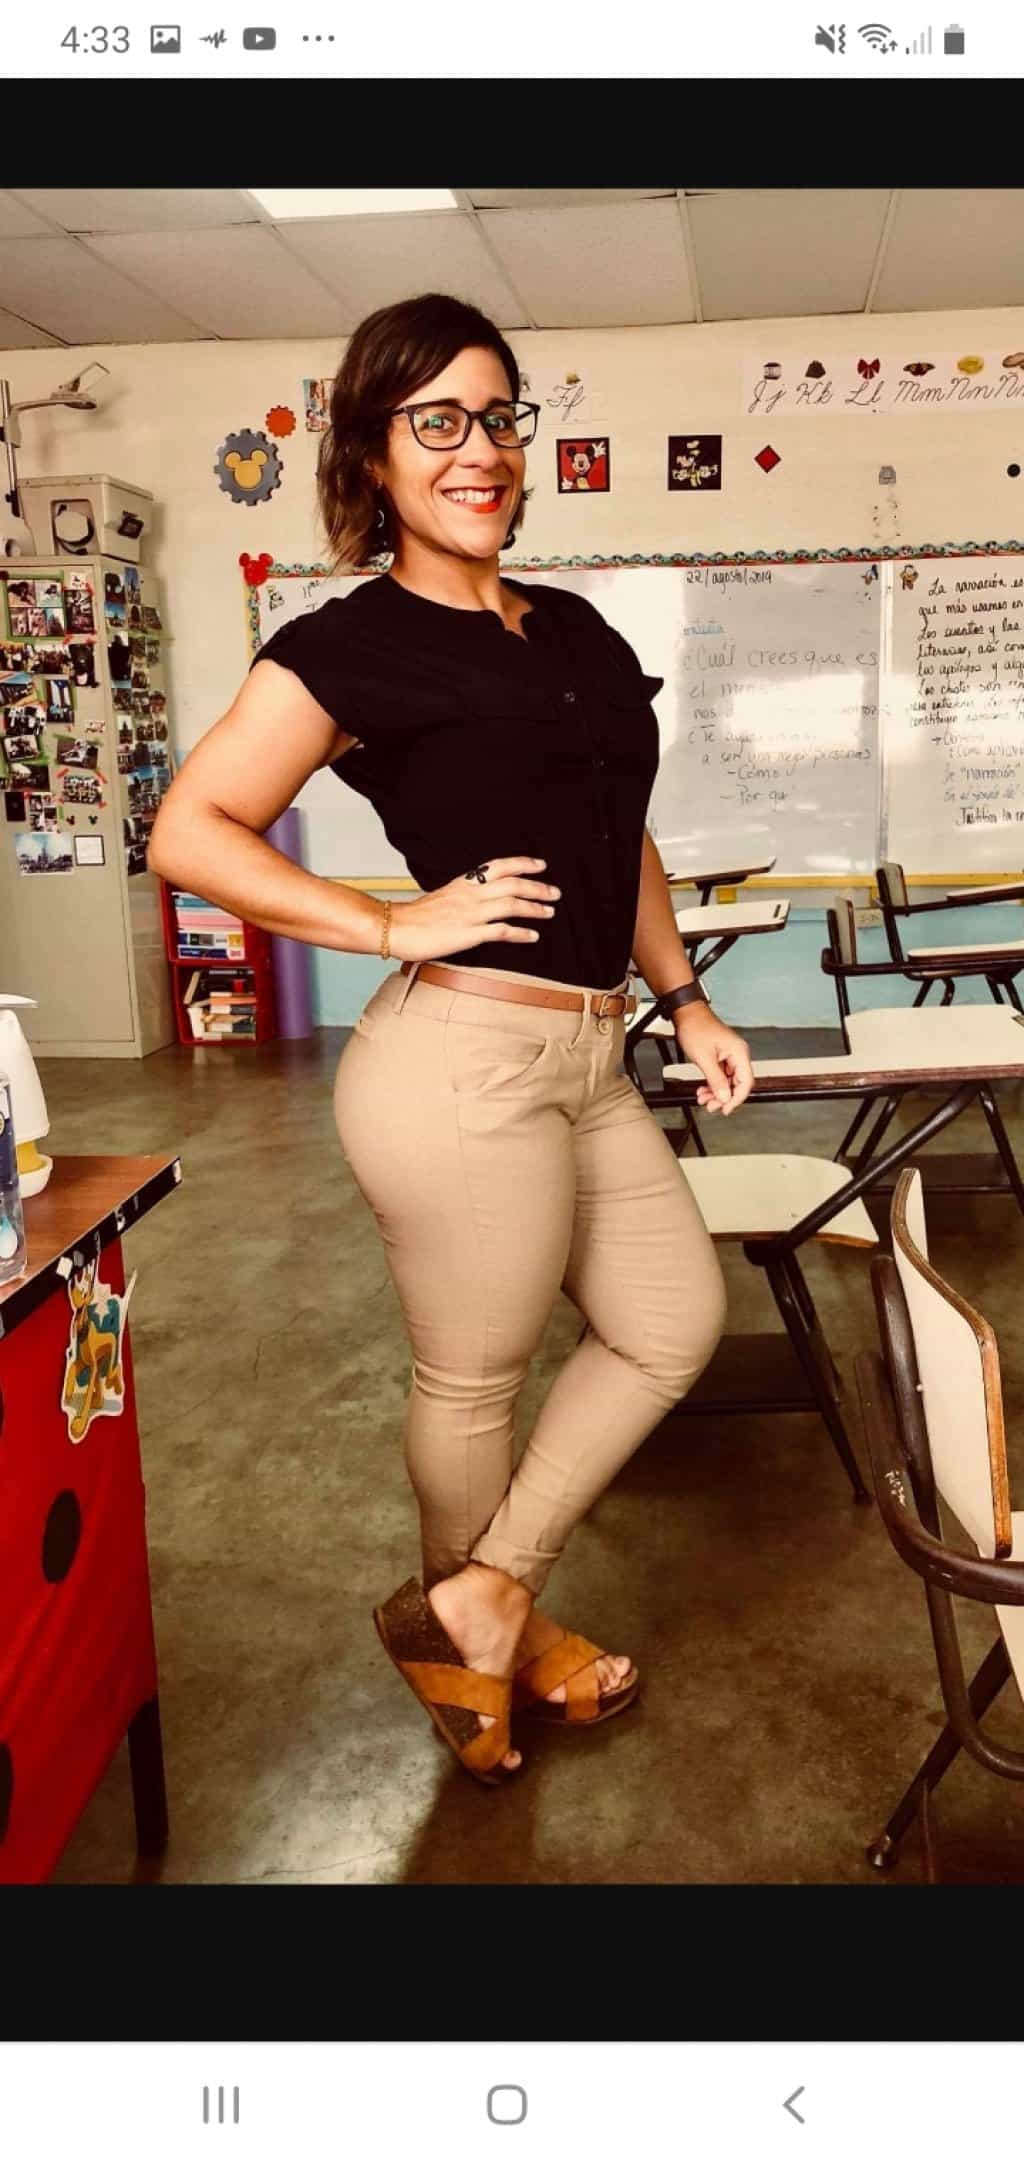 My spanish teacher, comment wat u would do to her. Dm me if u wanna talk about her